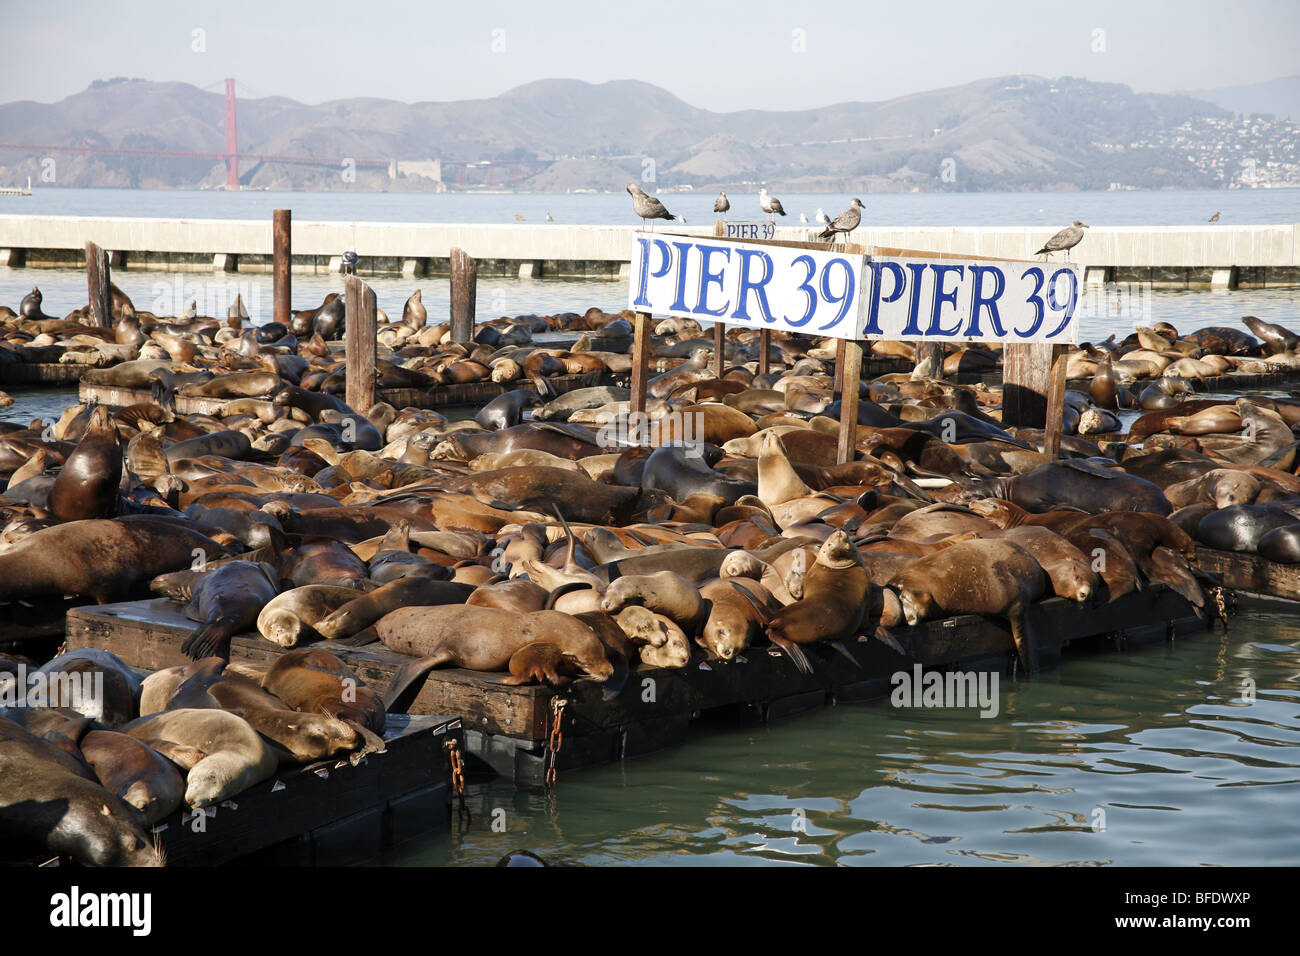 San Francisco Sea Lions And Seals Relaxing At Pier 39 Stock Photo -  Download Image Now - iStock